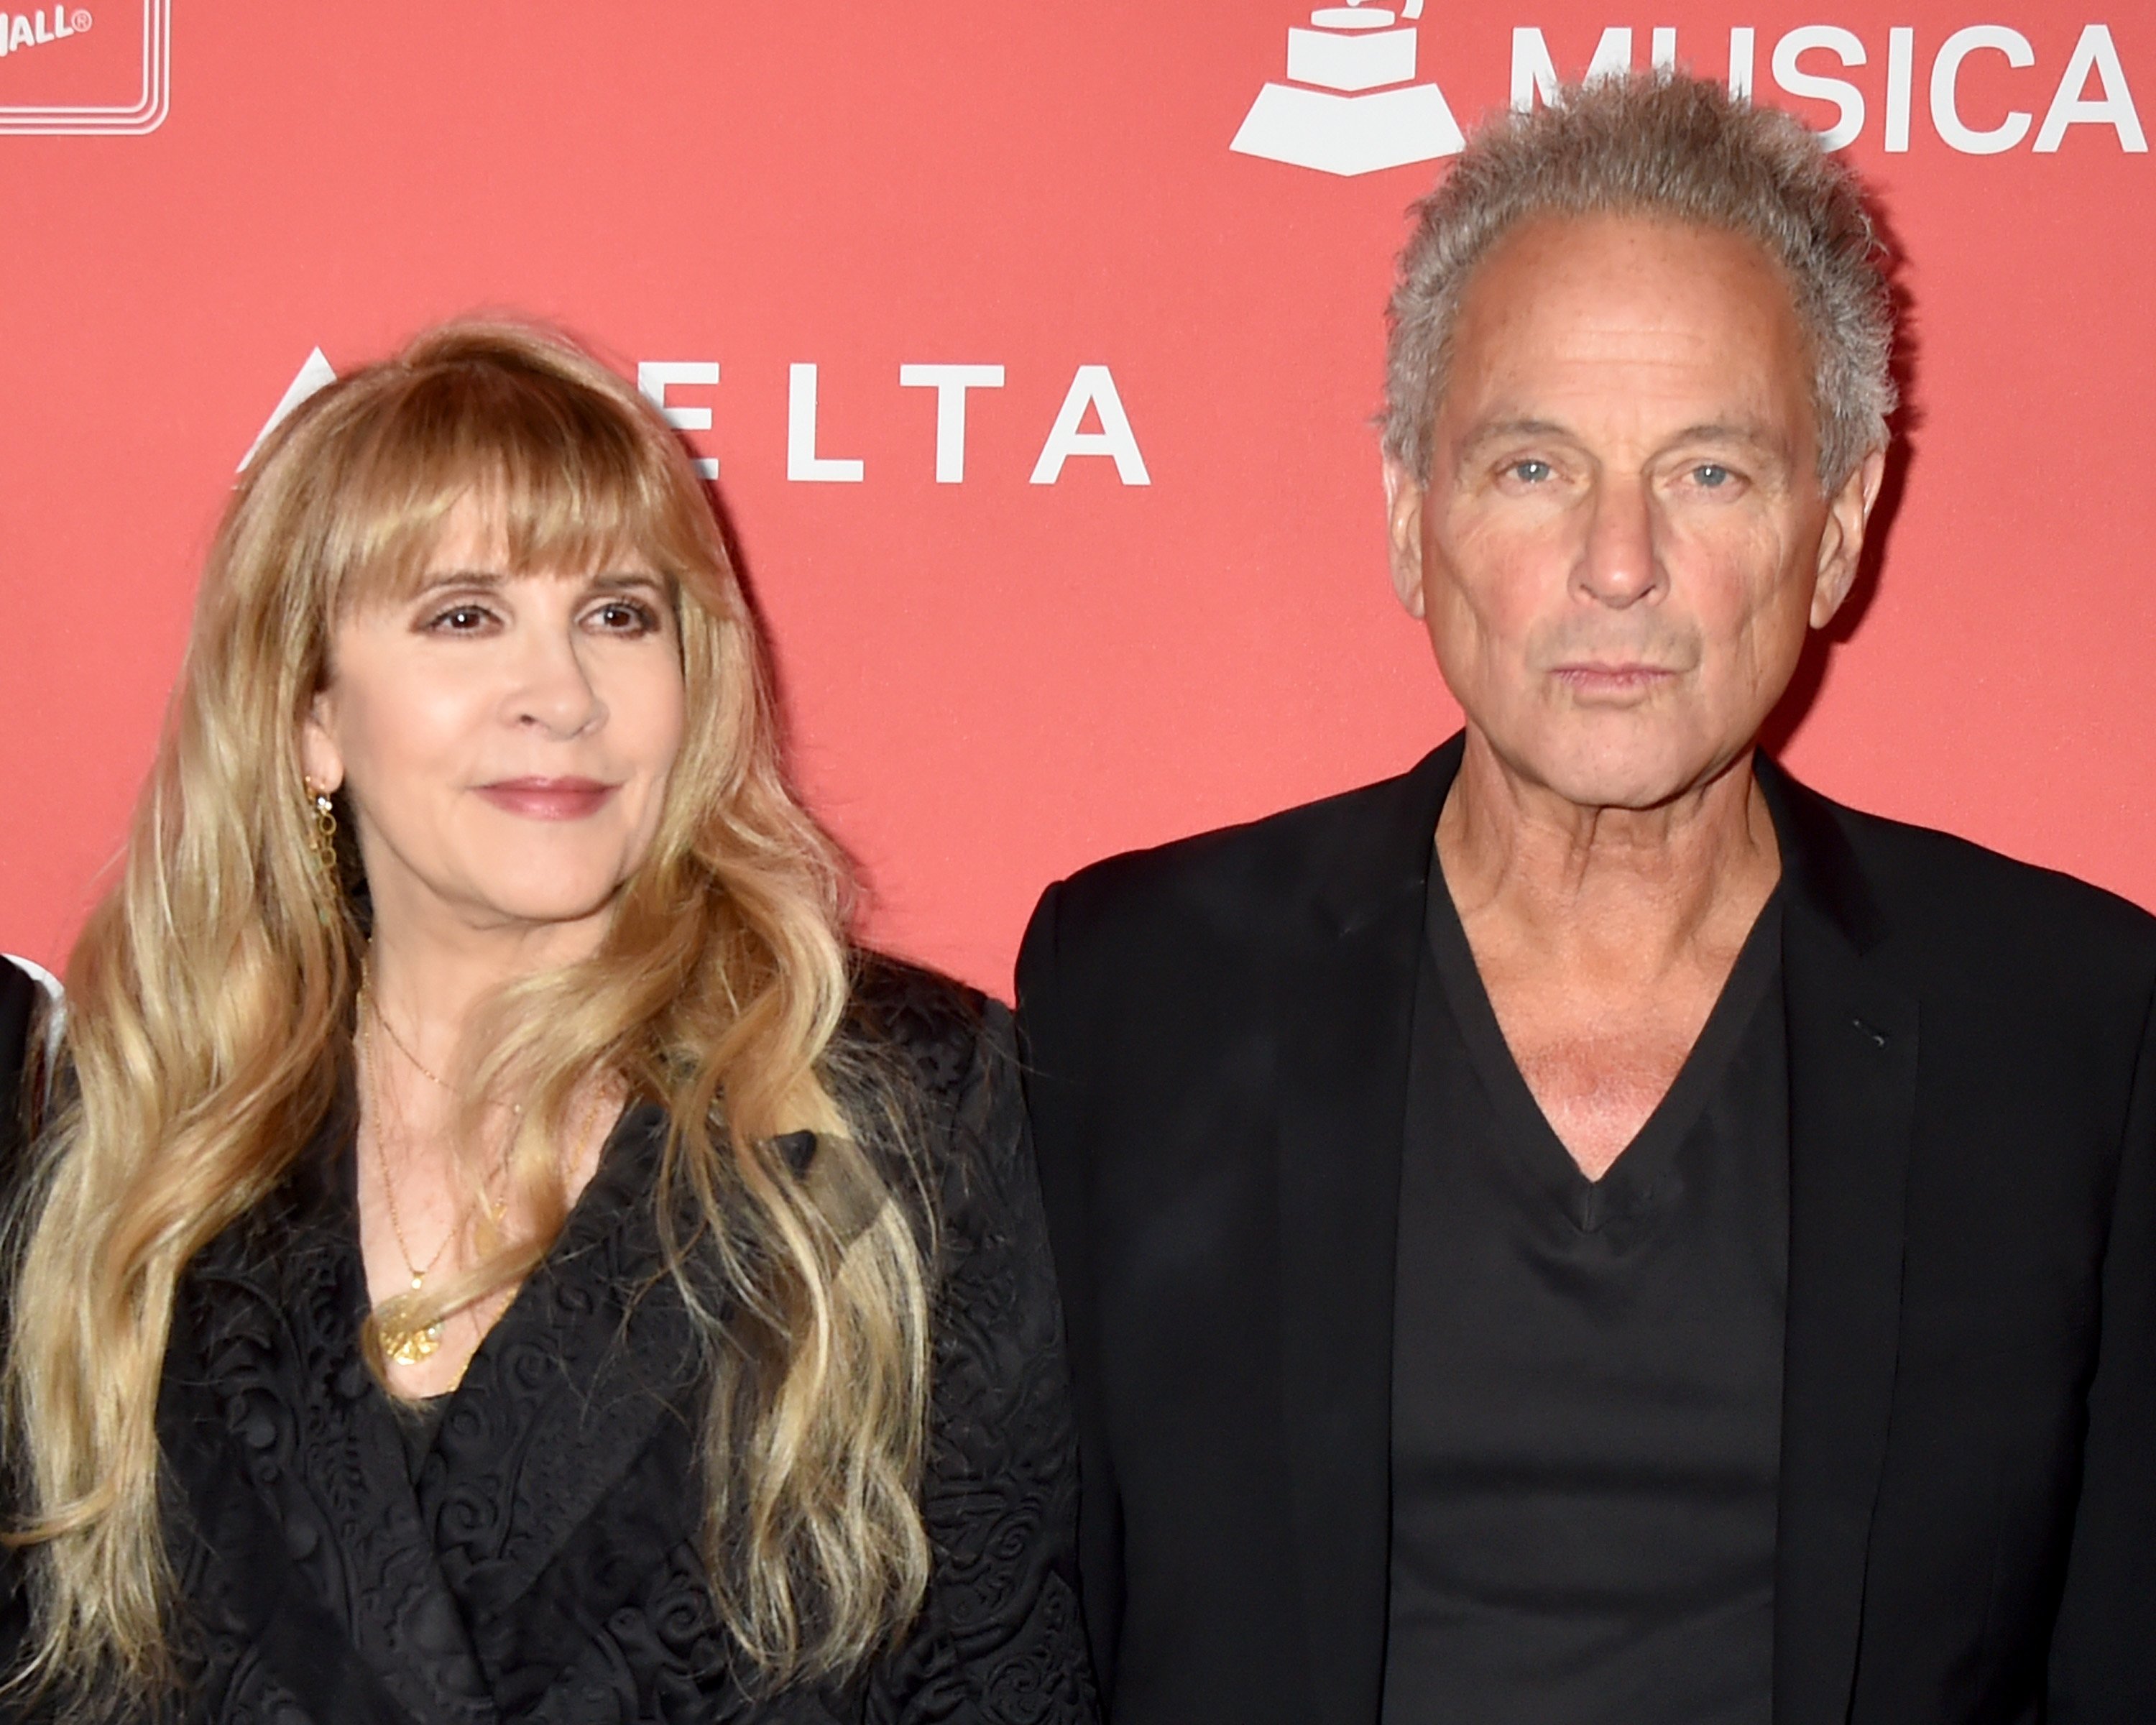 Stevie Nicks and Lindsey Buckingham stand together in front of an orange background. They both wear black outfits.